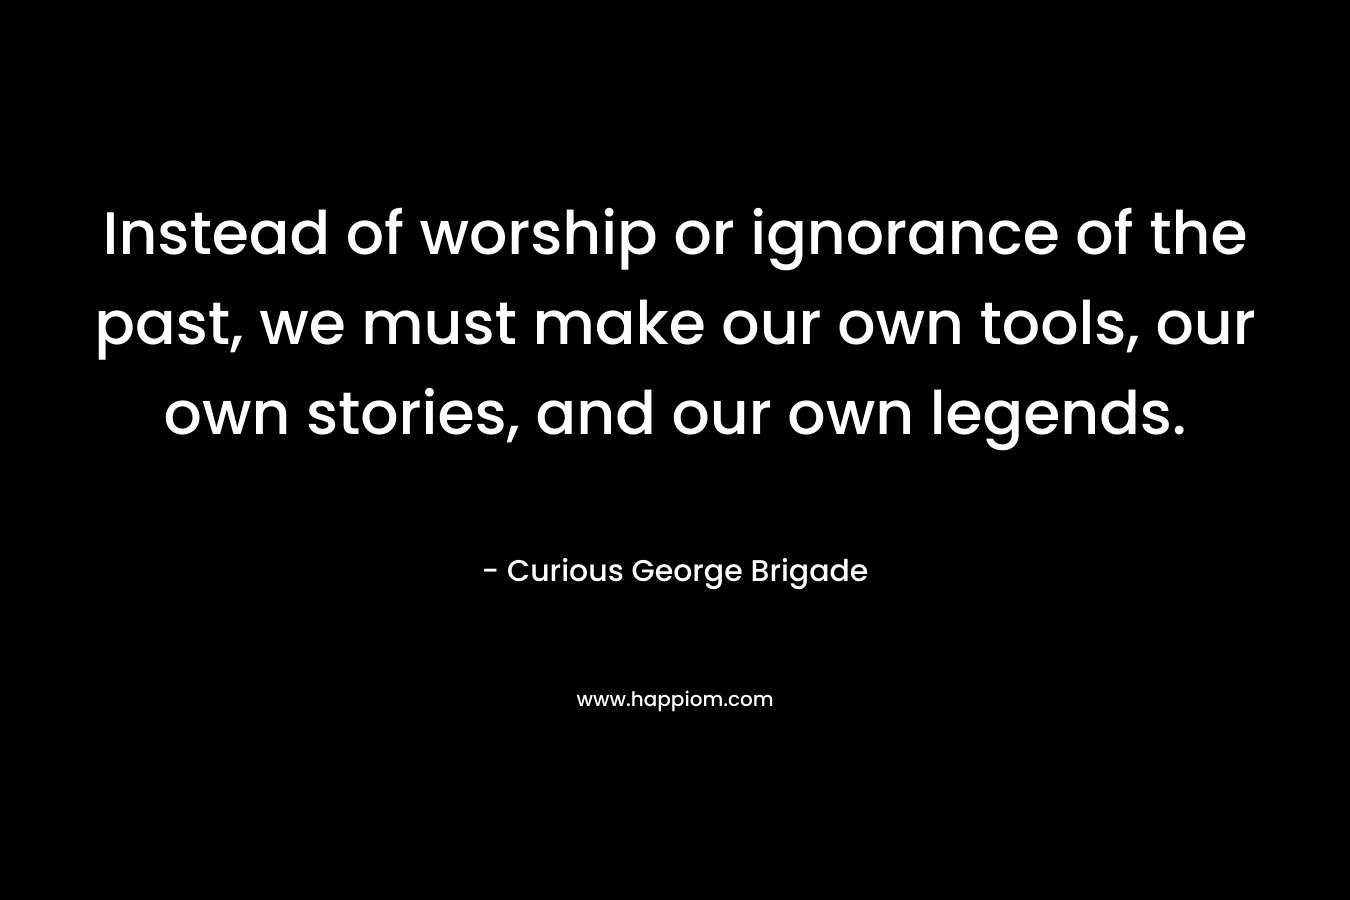 Instead of worship or ignorance of the past, we must make our own tools, our own stories, and our own legends.